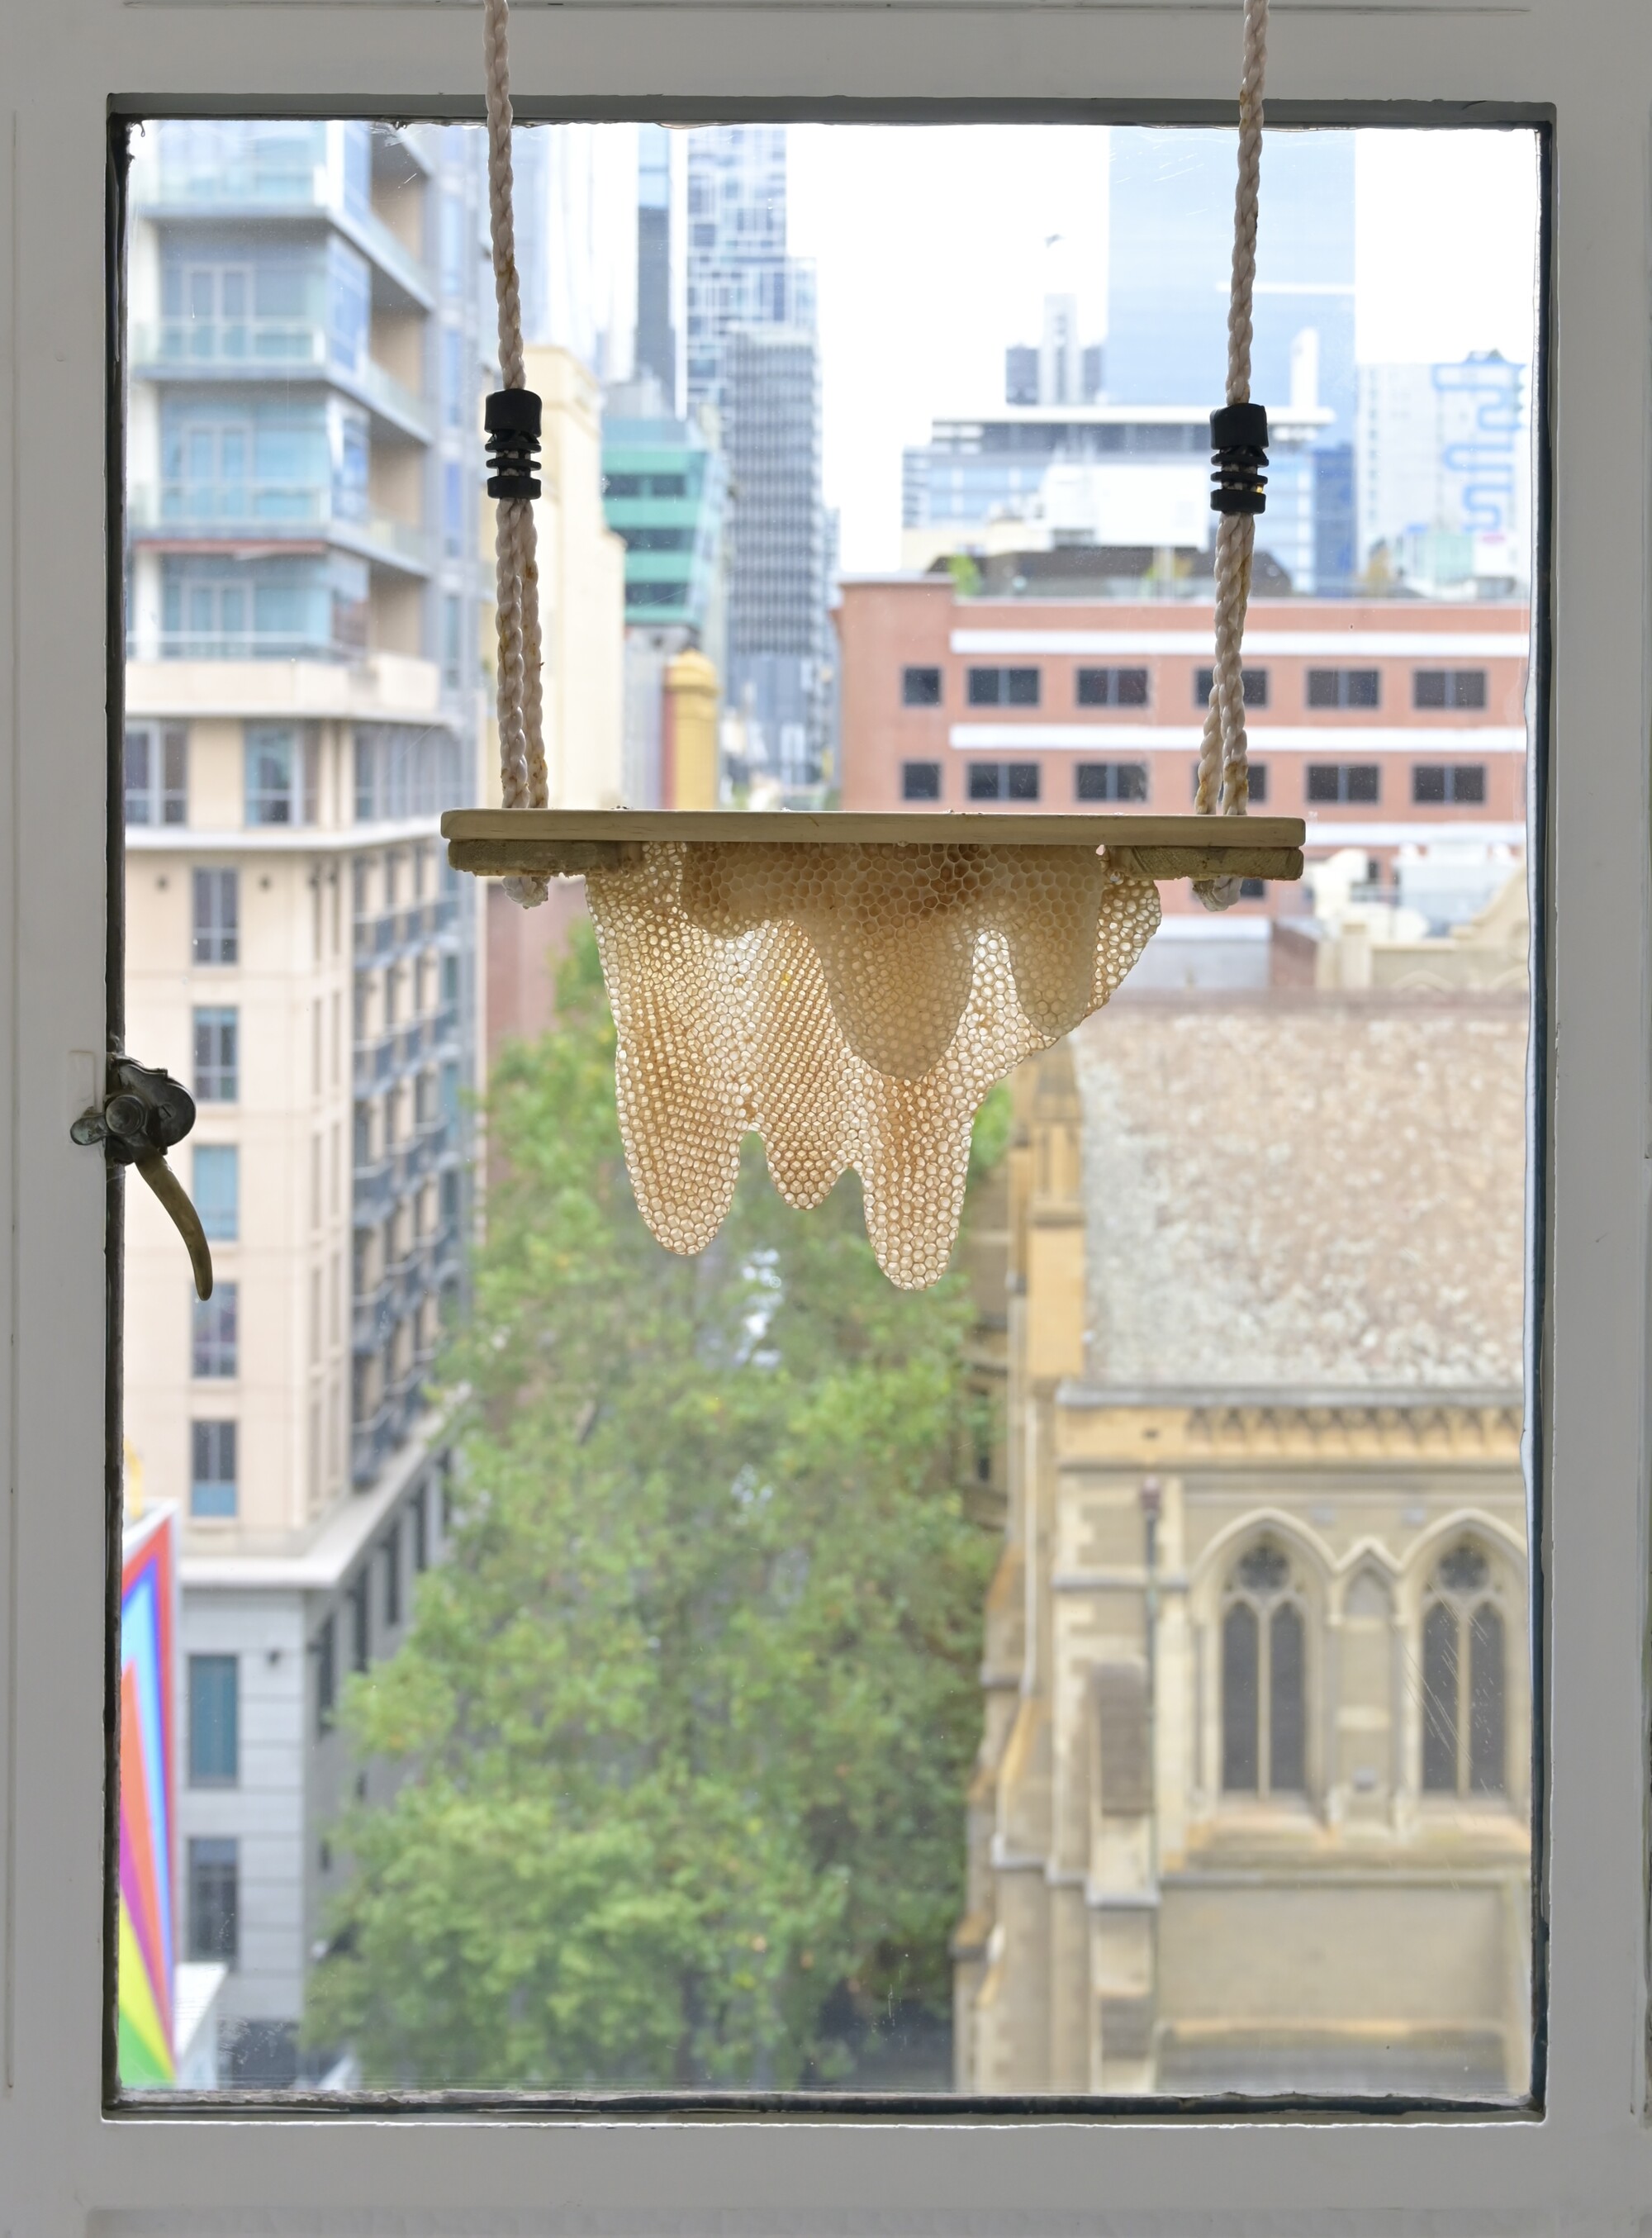 Installation view of <em>Communal Atmosphere or The Space The Air (Falls) behind you as you move</em>, curated by Rozalind Drummond, Caves, Melbourne, 2022. Honeyfingers, <em>Playground Love</em>, 2022, rope, pine, honeycomb, steel hanging point, dimensions variable. Photo: Caves